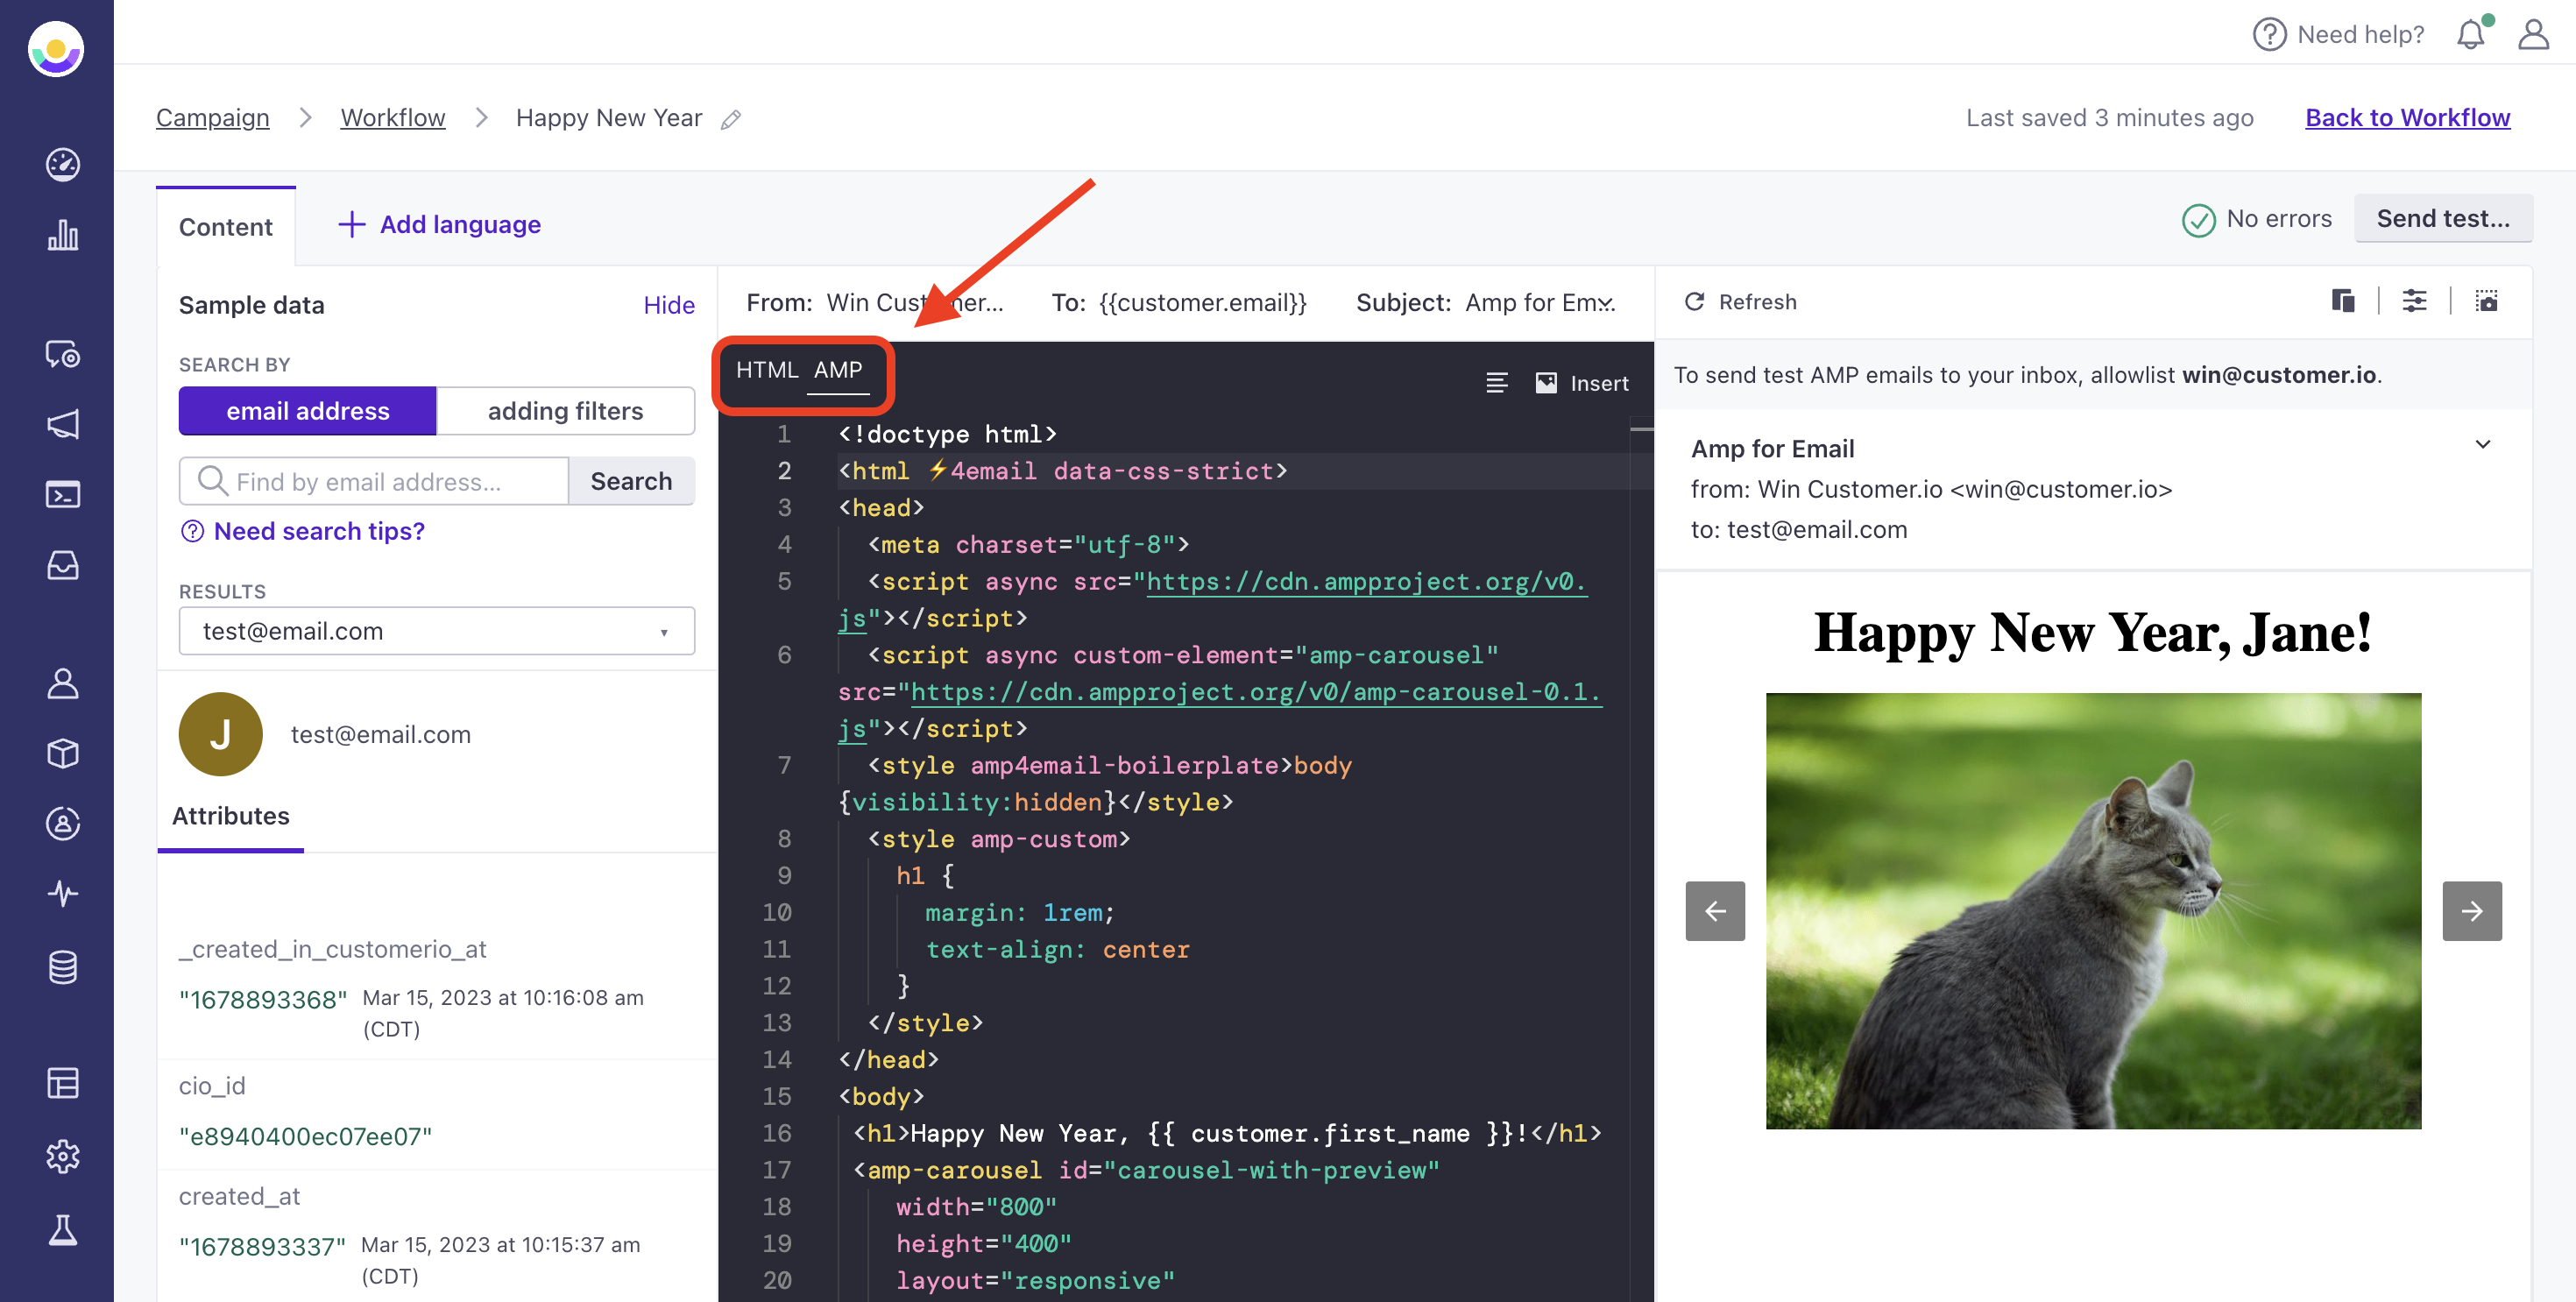 In the center of the page is the code editor for an email. There are two tabs at the top of the editor: HTML and AMP. AMP is selected and the editor shows an AMP template with the preview displaying on the right hand panel.